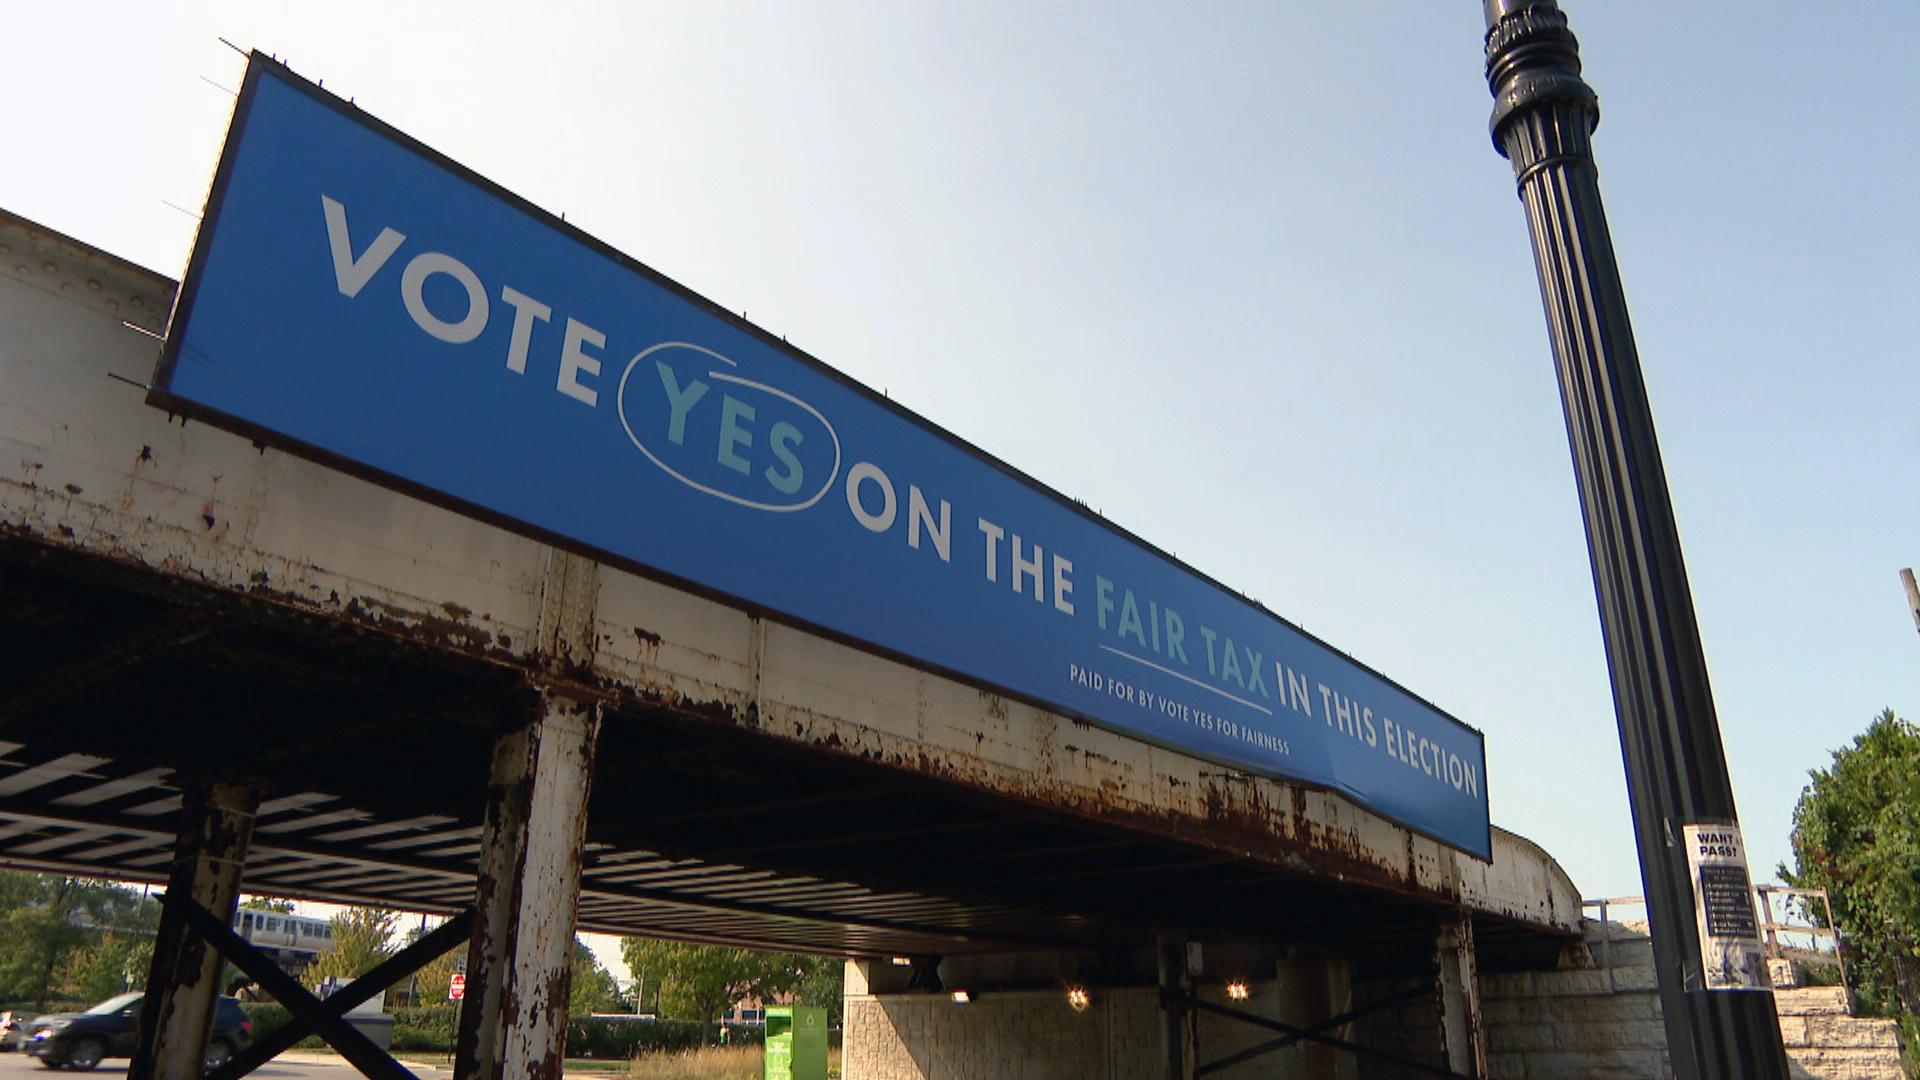 A billboard in Chicago promotes voting in favor of the so-called fair tax in the November 2020 election. (WTTW News)